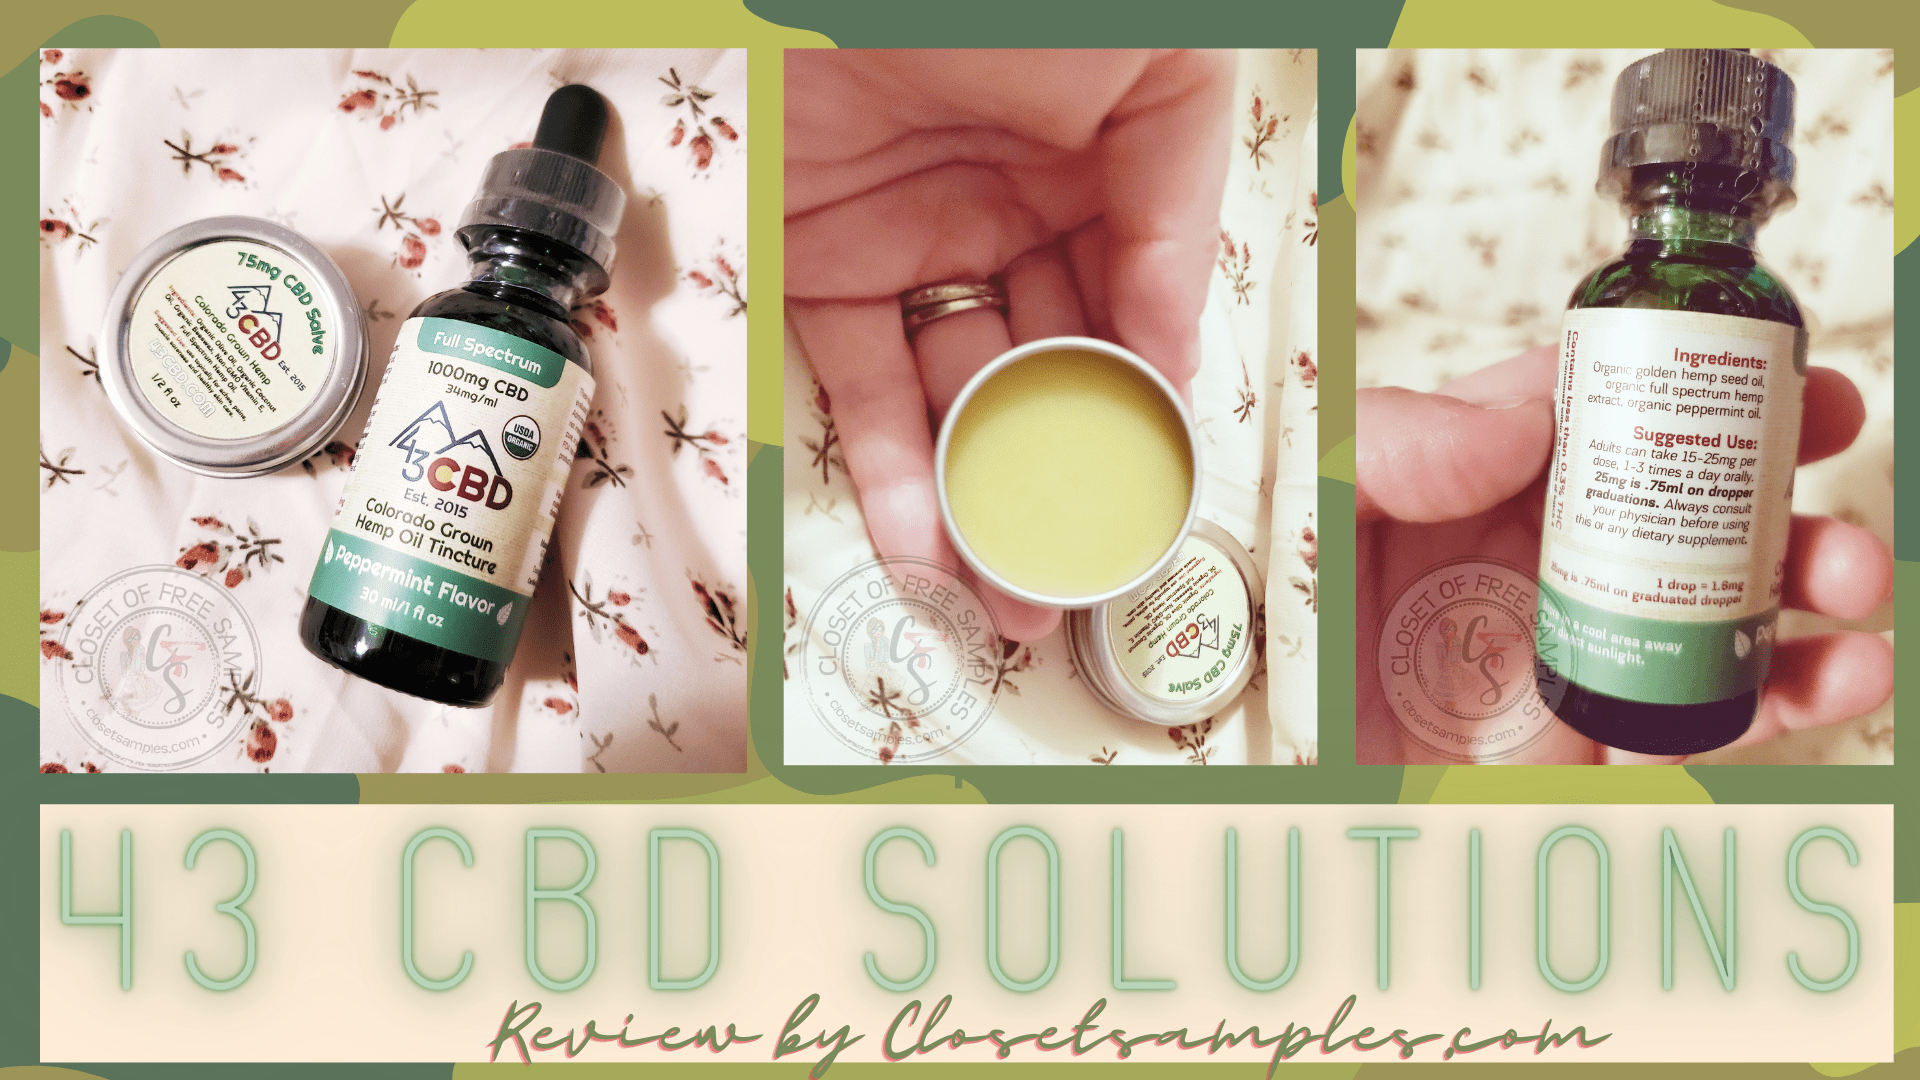 43 CBD Solutions #Review